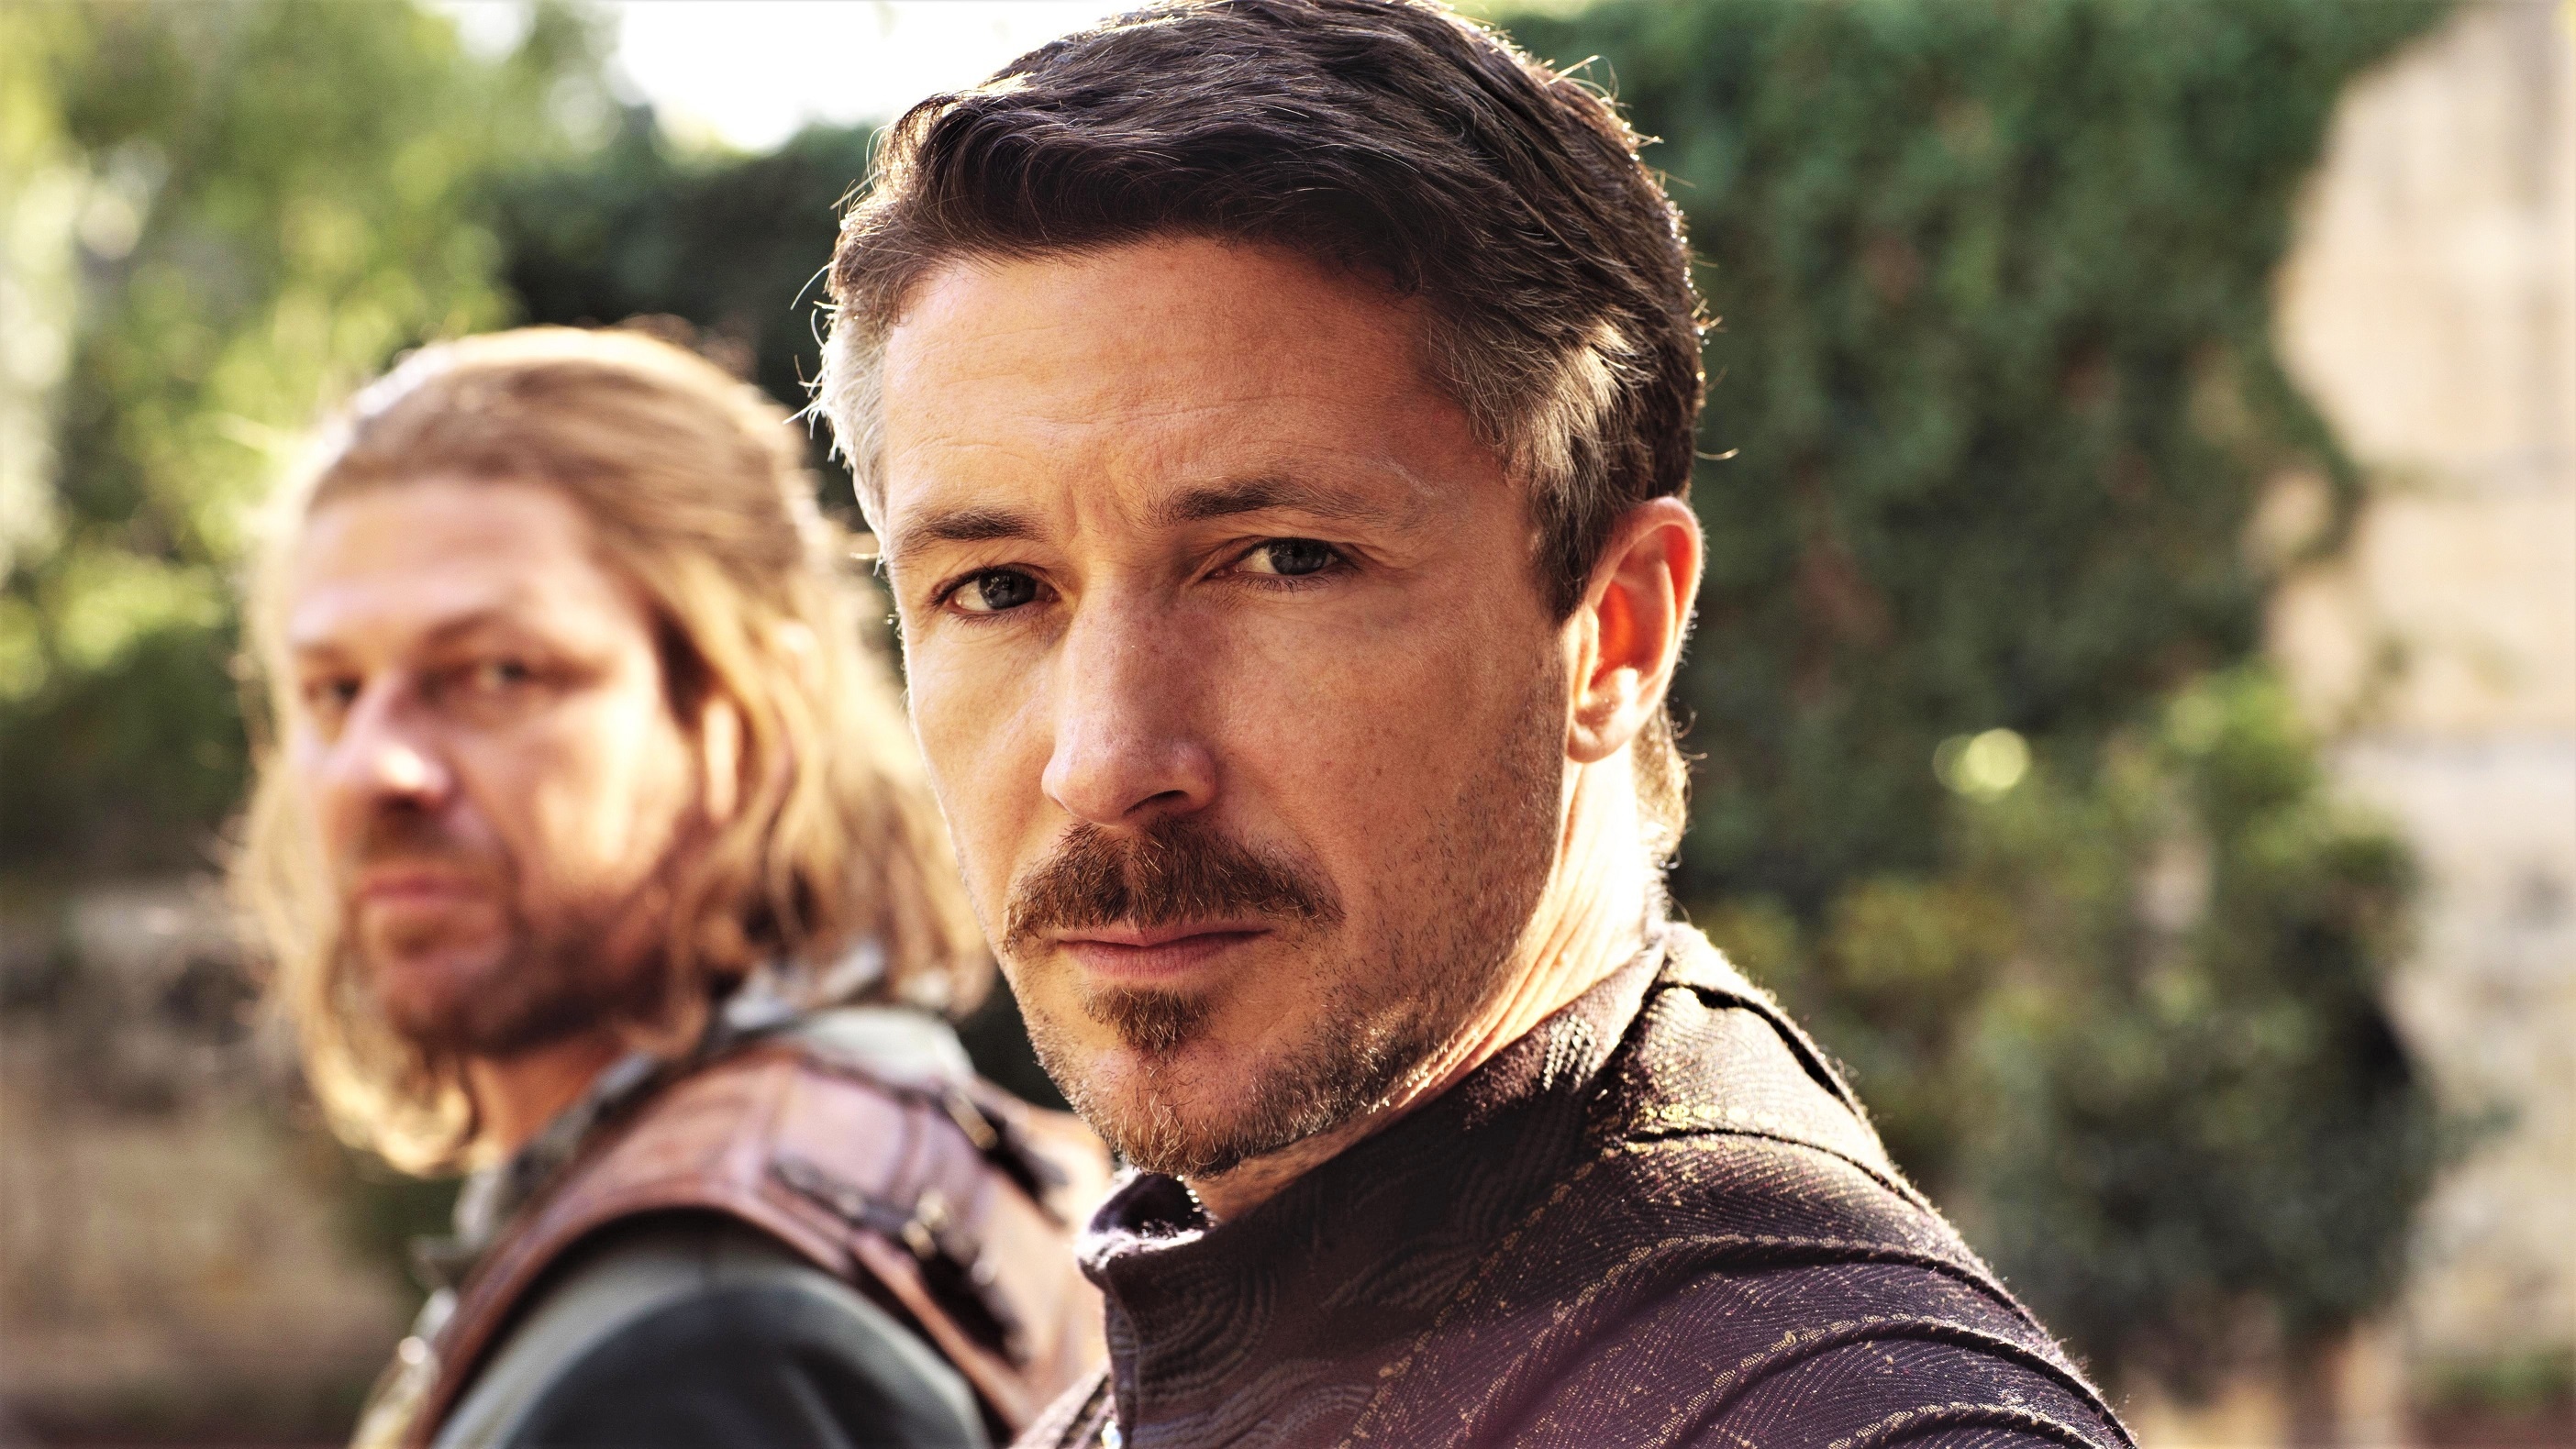 House Baelish, The rise and fall, Littlefinger's game, Game of Thrones community, 2810x1580 HD Desktop